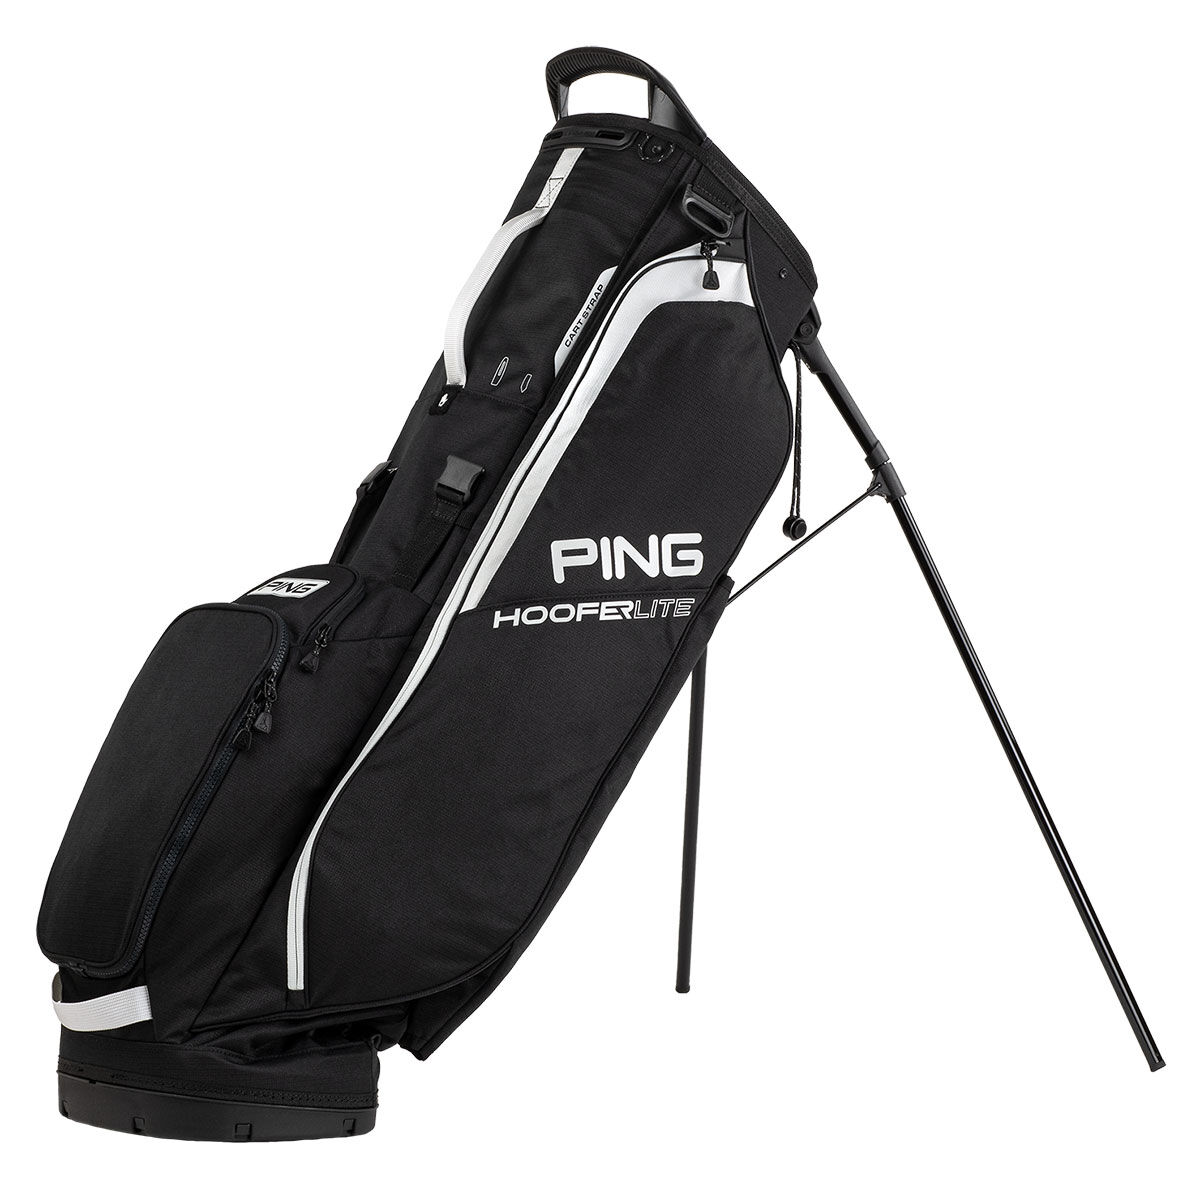 PING Hoofer Lite 231 Golf Stand Bag, Black, one size | American Golf von Ping